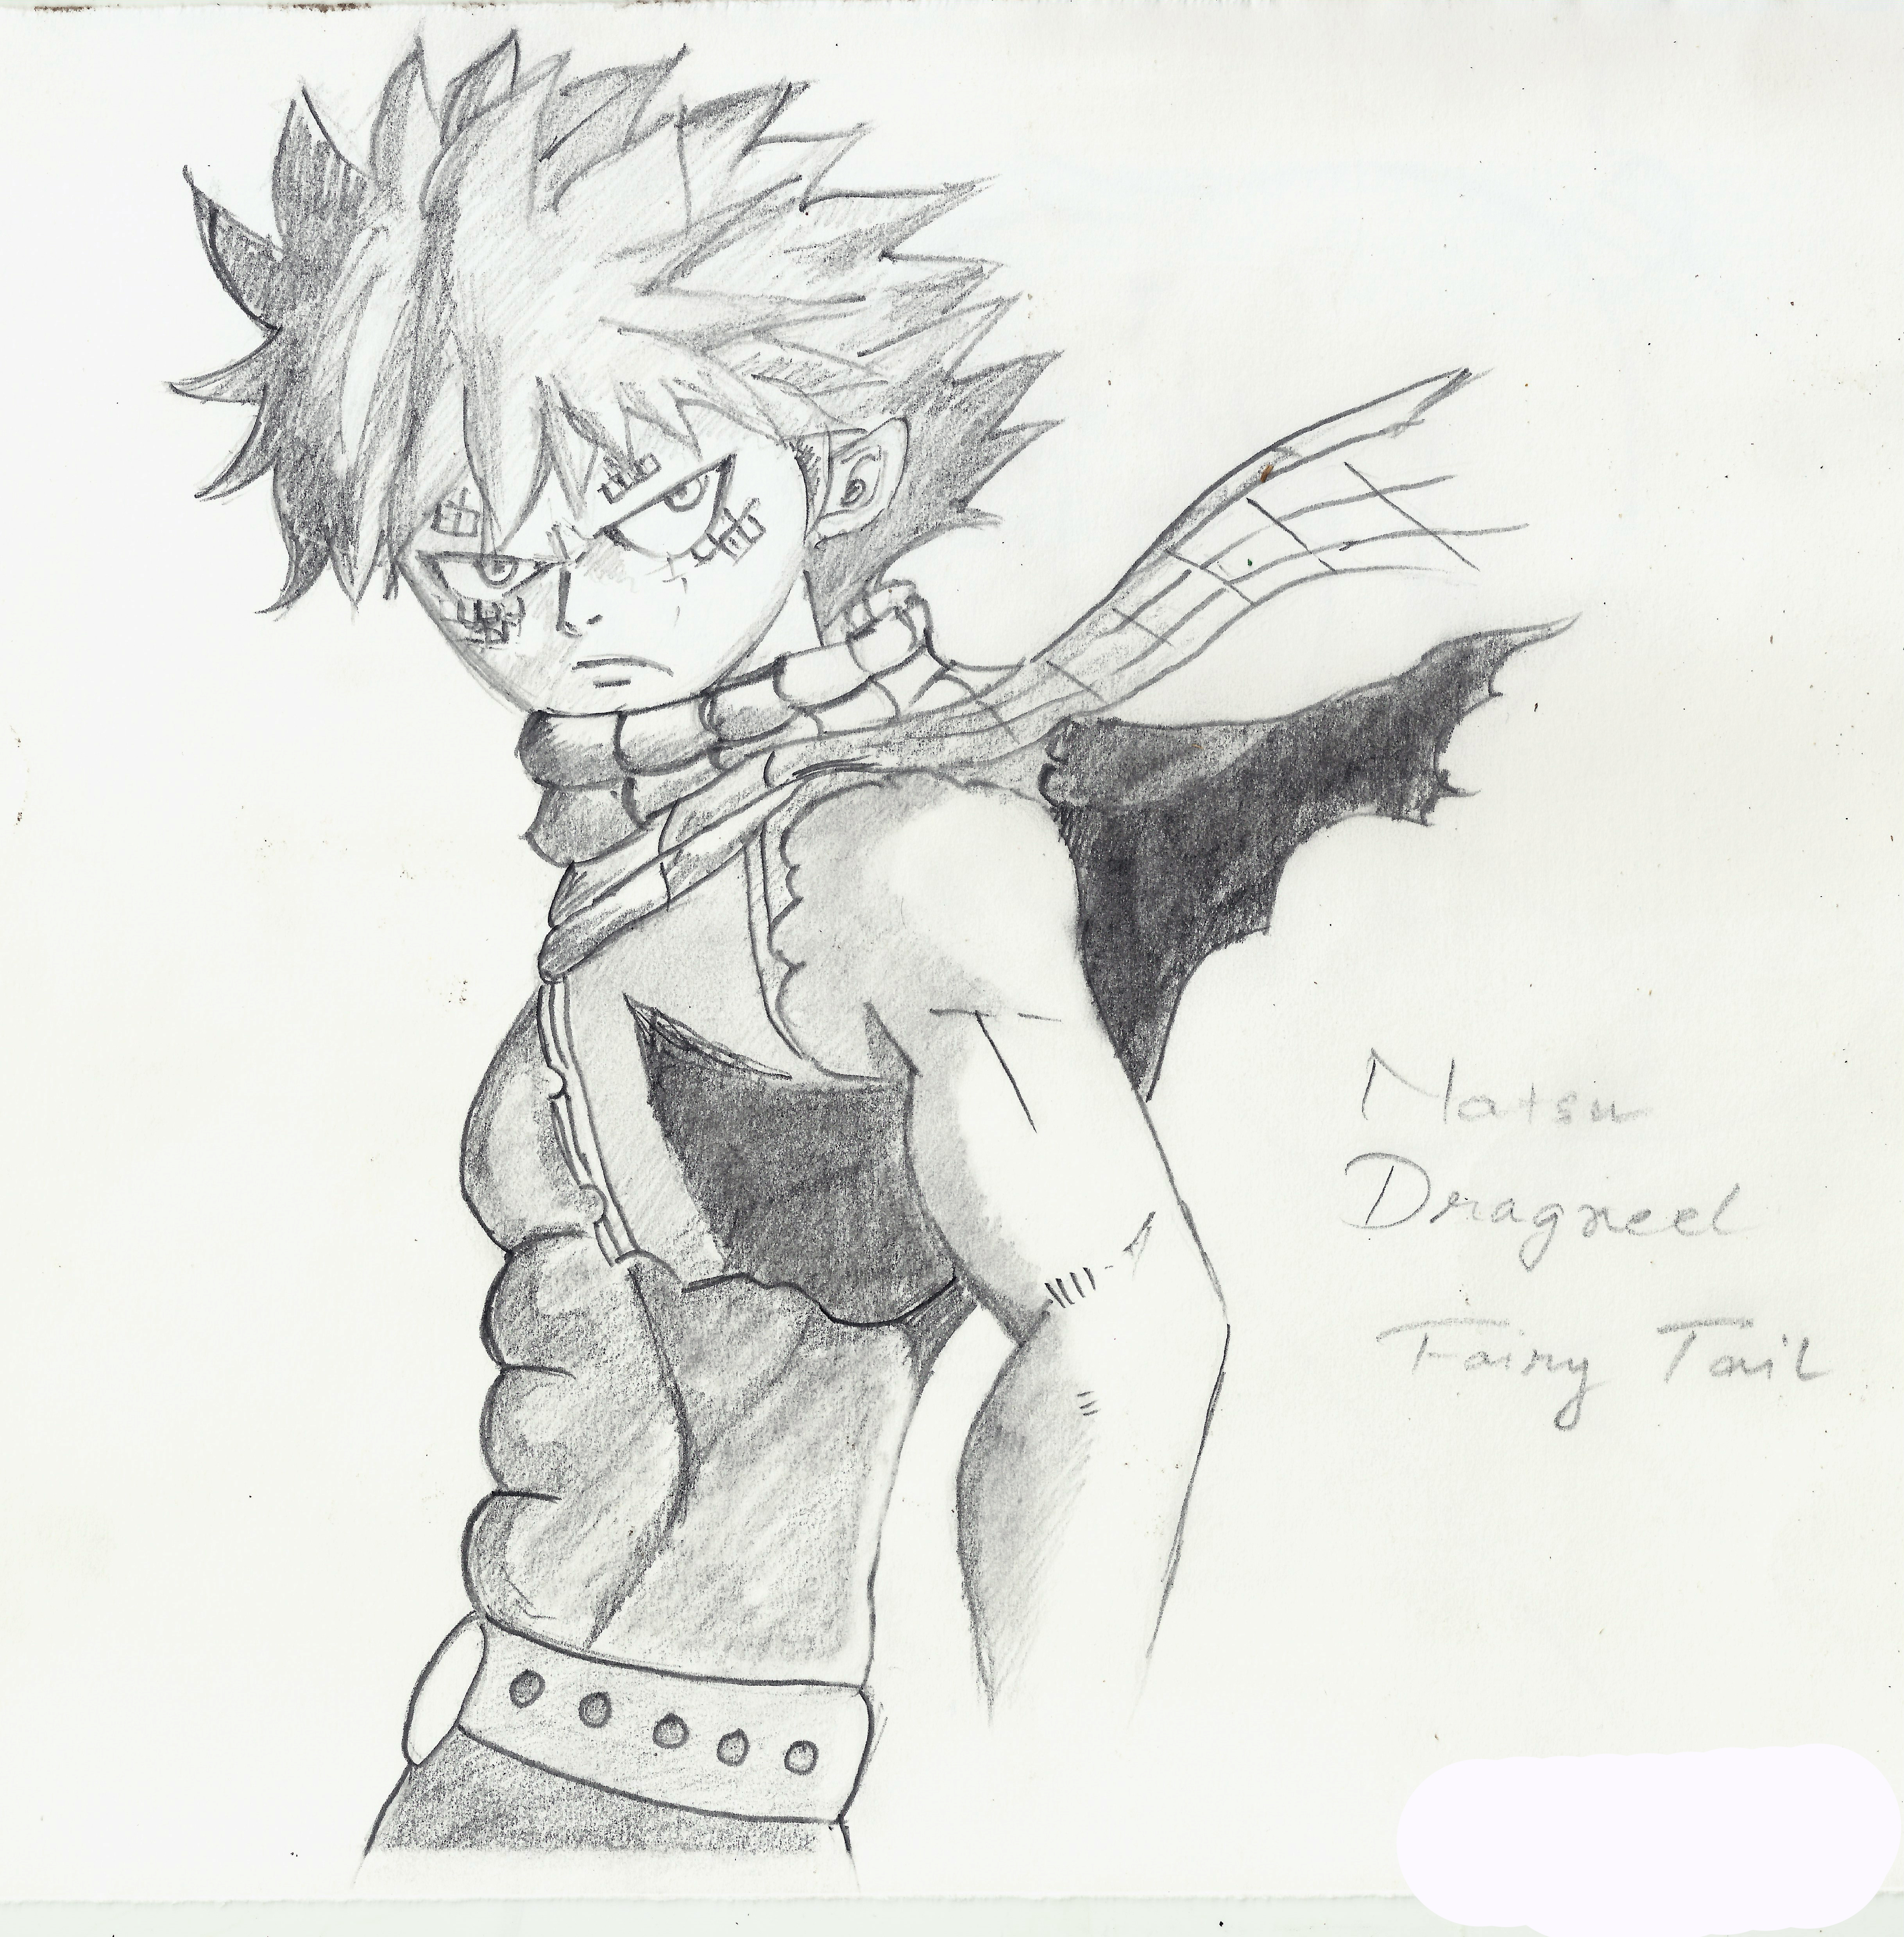 Natsu in Dragon Force, Fairy Tail by suvodeep12 on DeviantArt